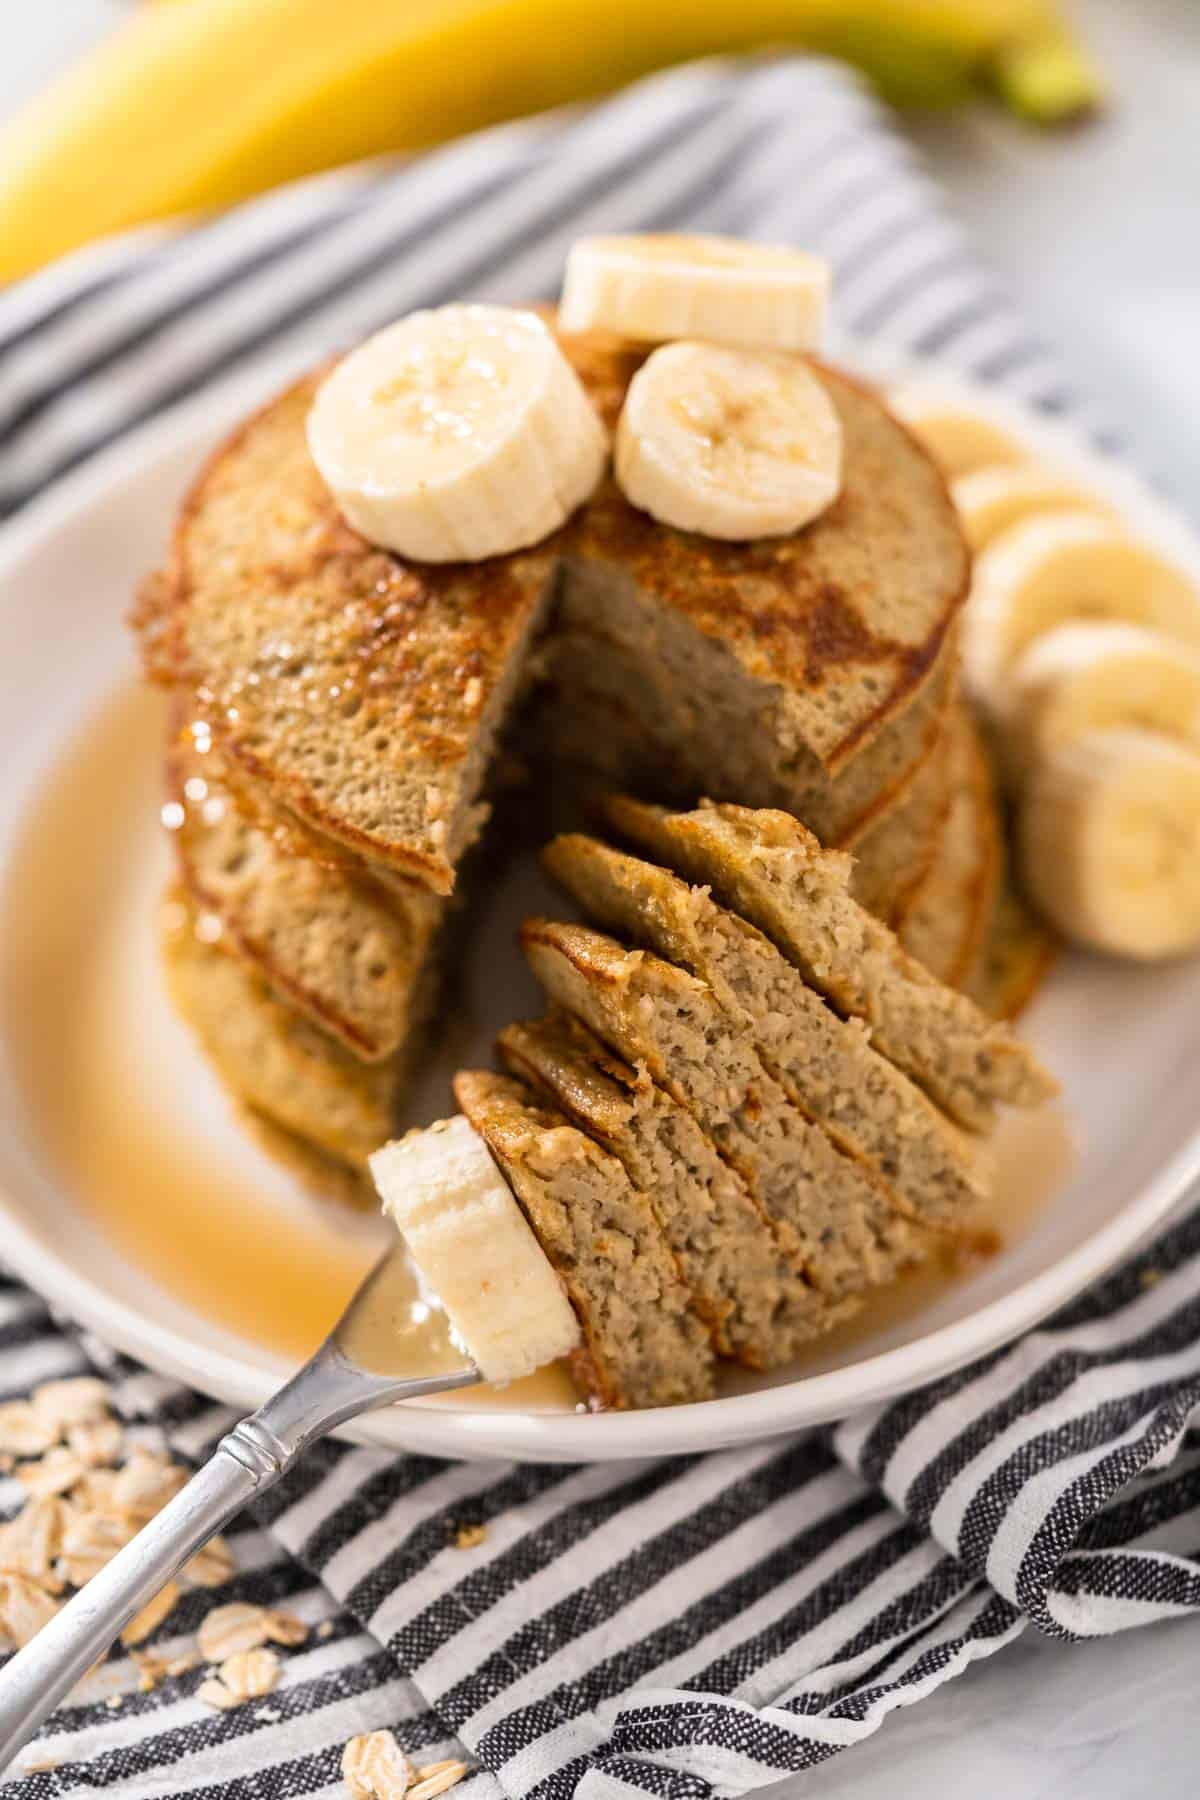 Maple syrup and bananas topping a stack of three ingredient banana oat pancakes.